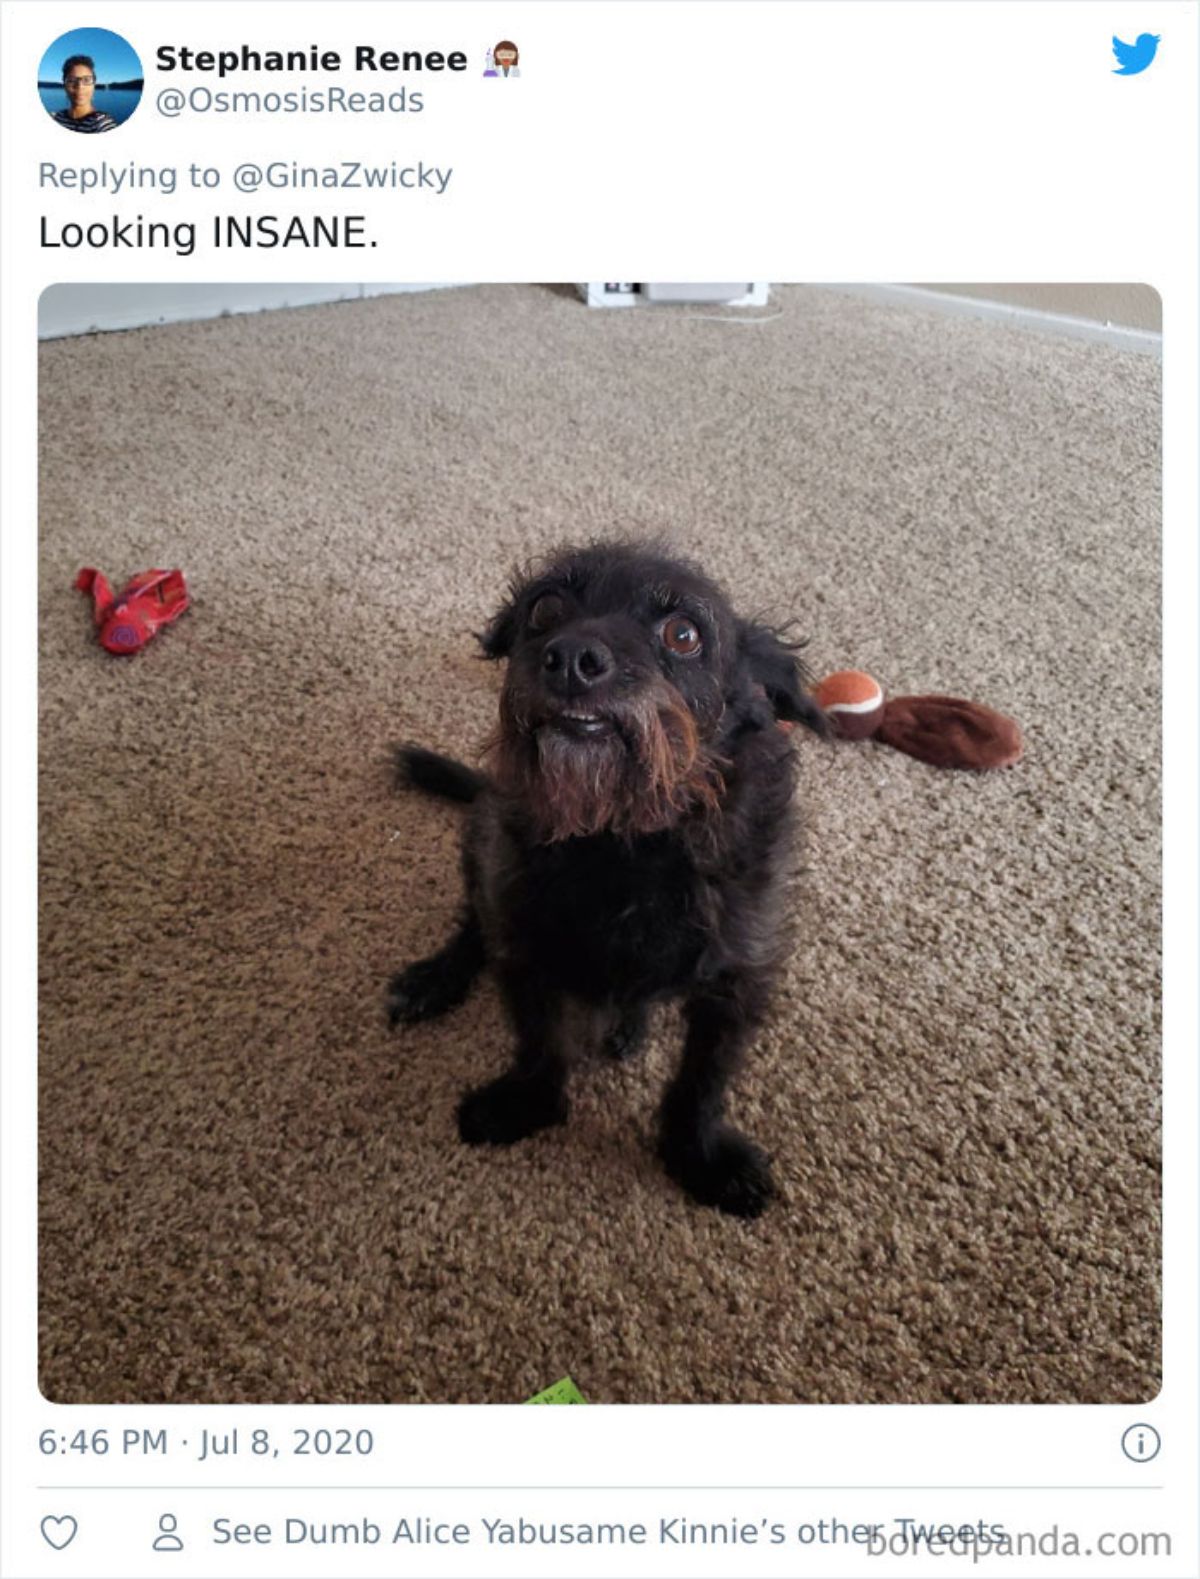 tweet of a brown scraggly dog standing on a brown carpet